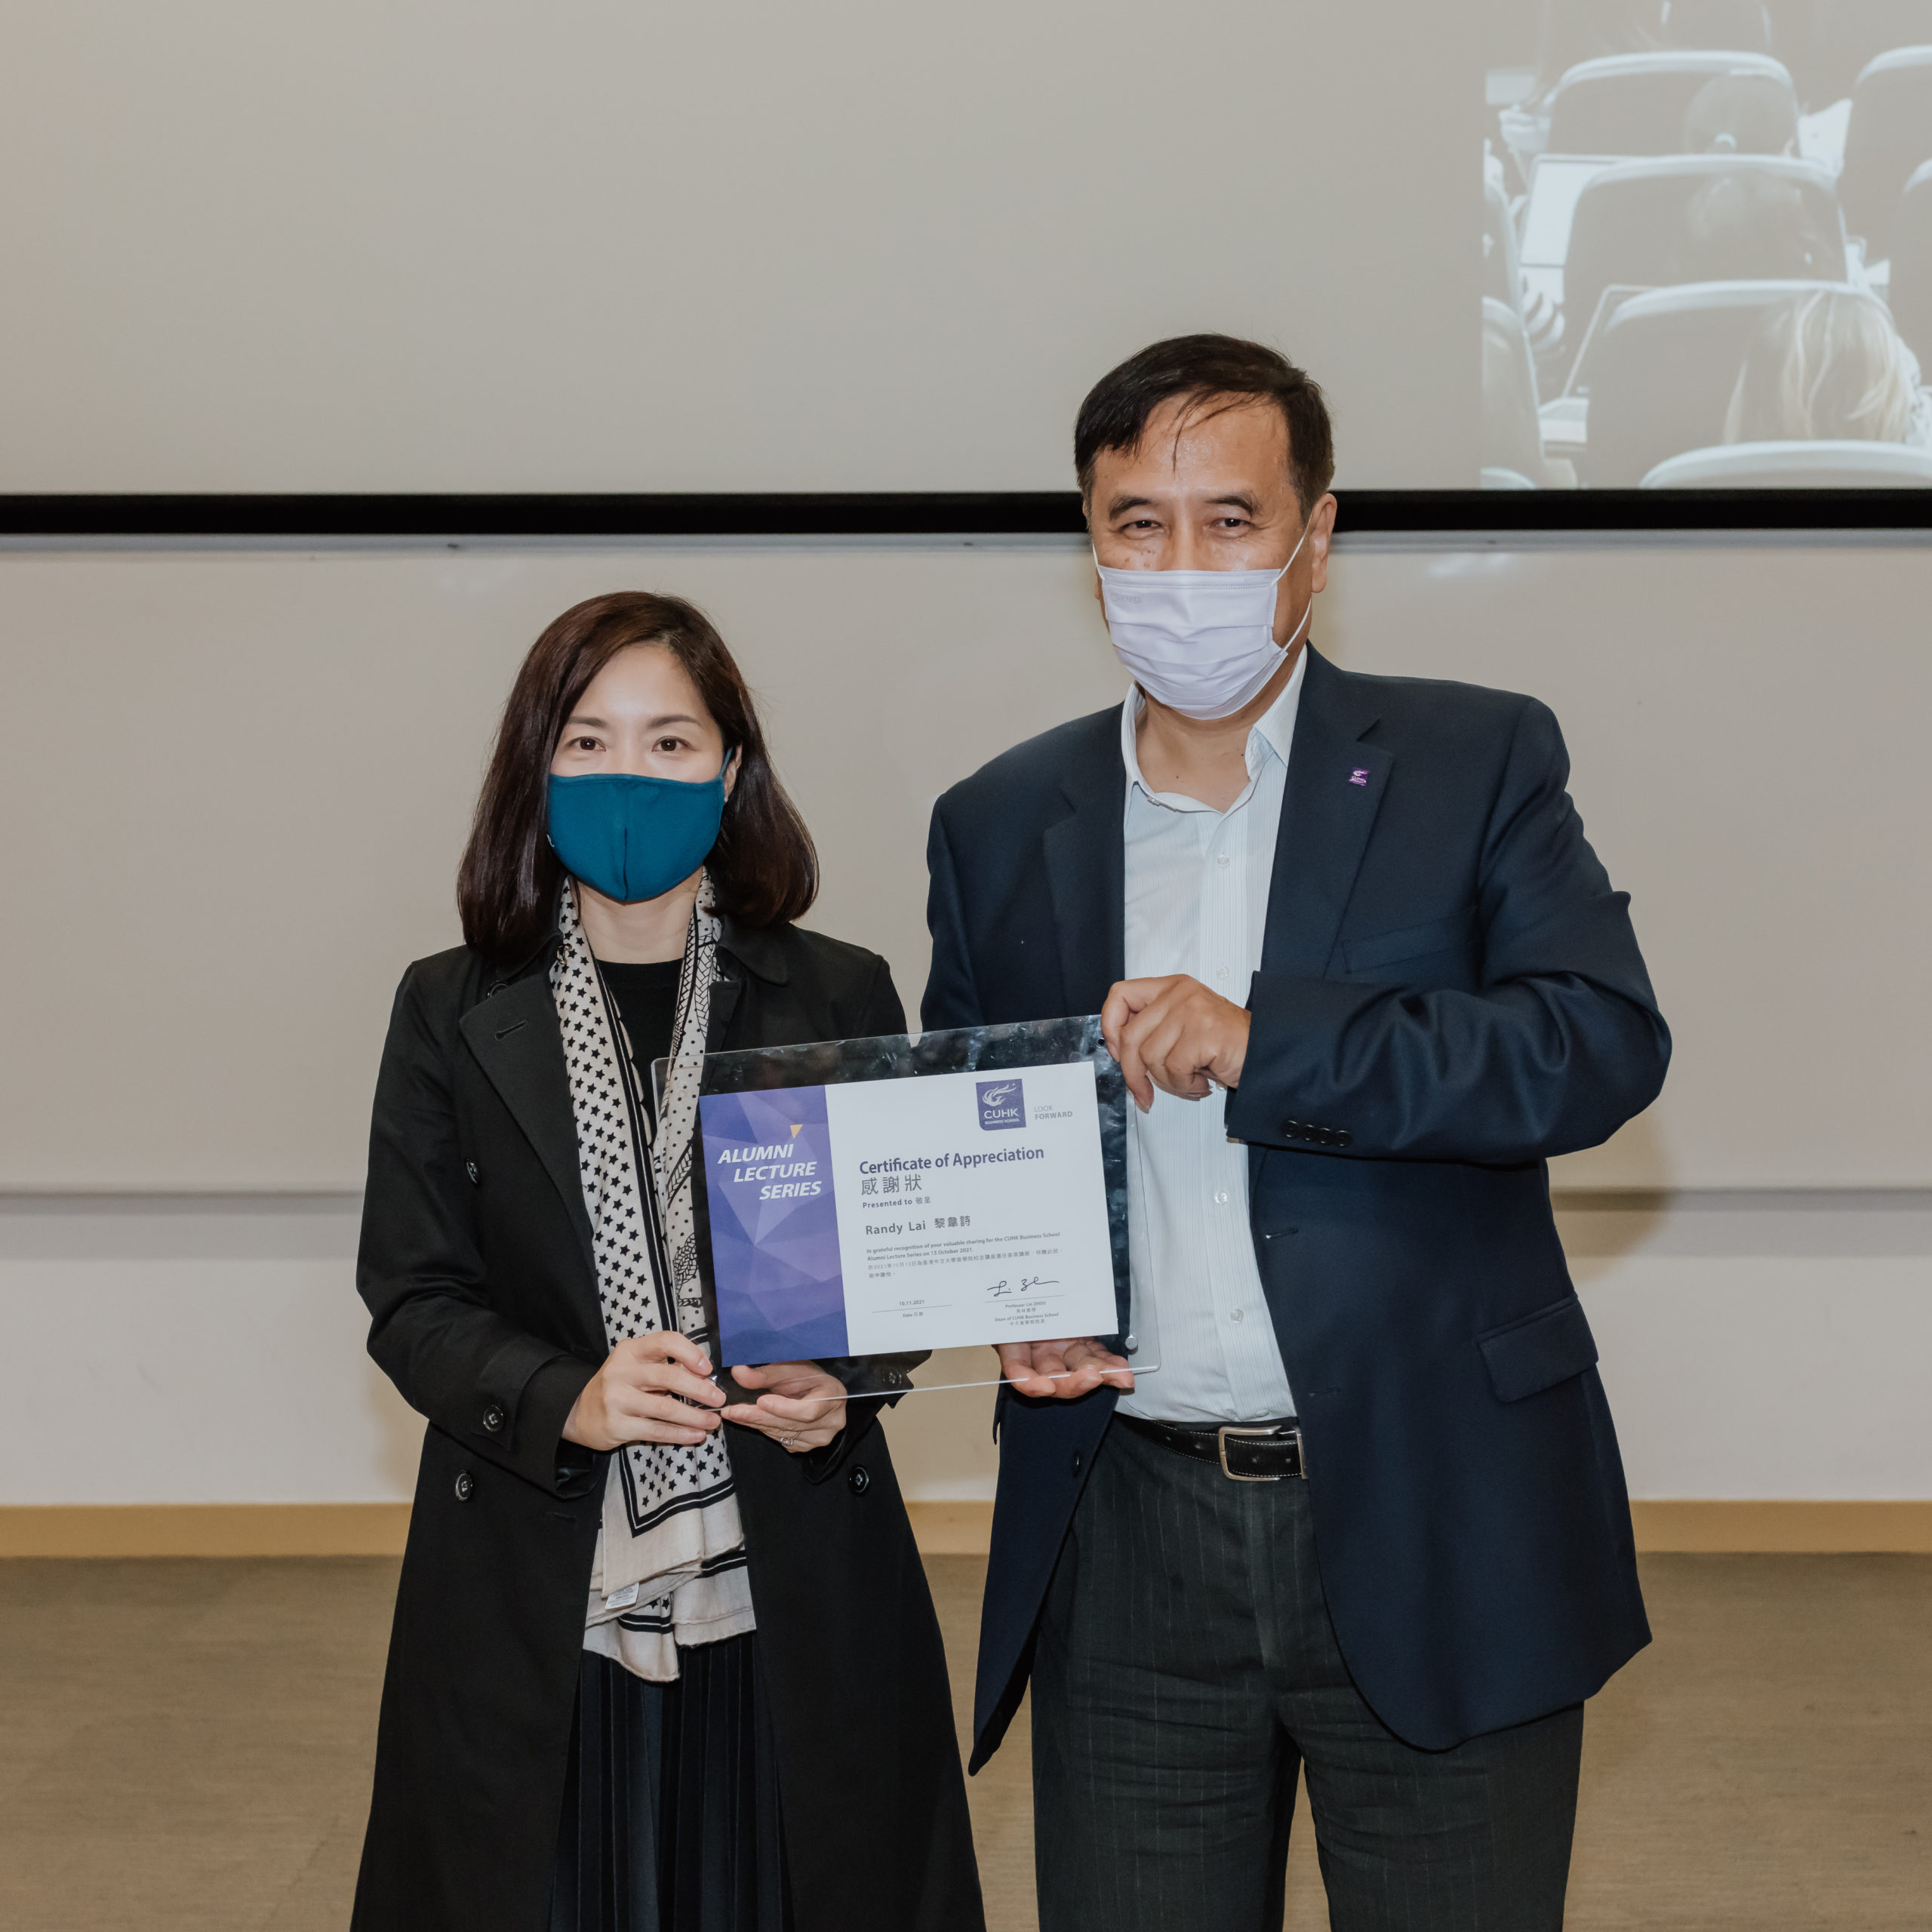 Professor Lin Zhou (right), Dean of the CUHK Business School, presenting a Certificate of Appreciation to Randy to recognise her unwavering support to CUHK Business School